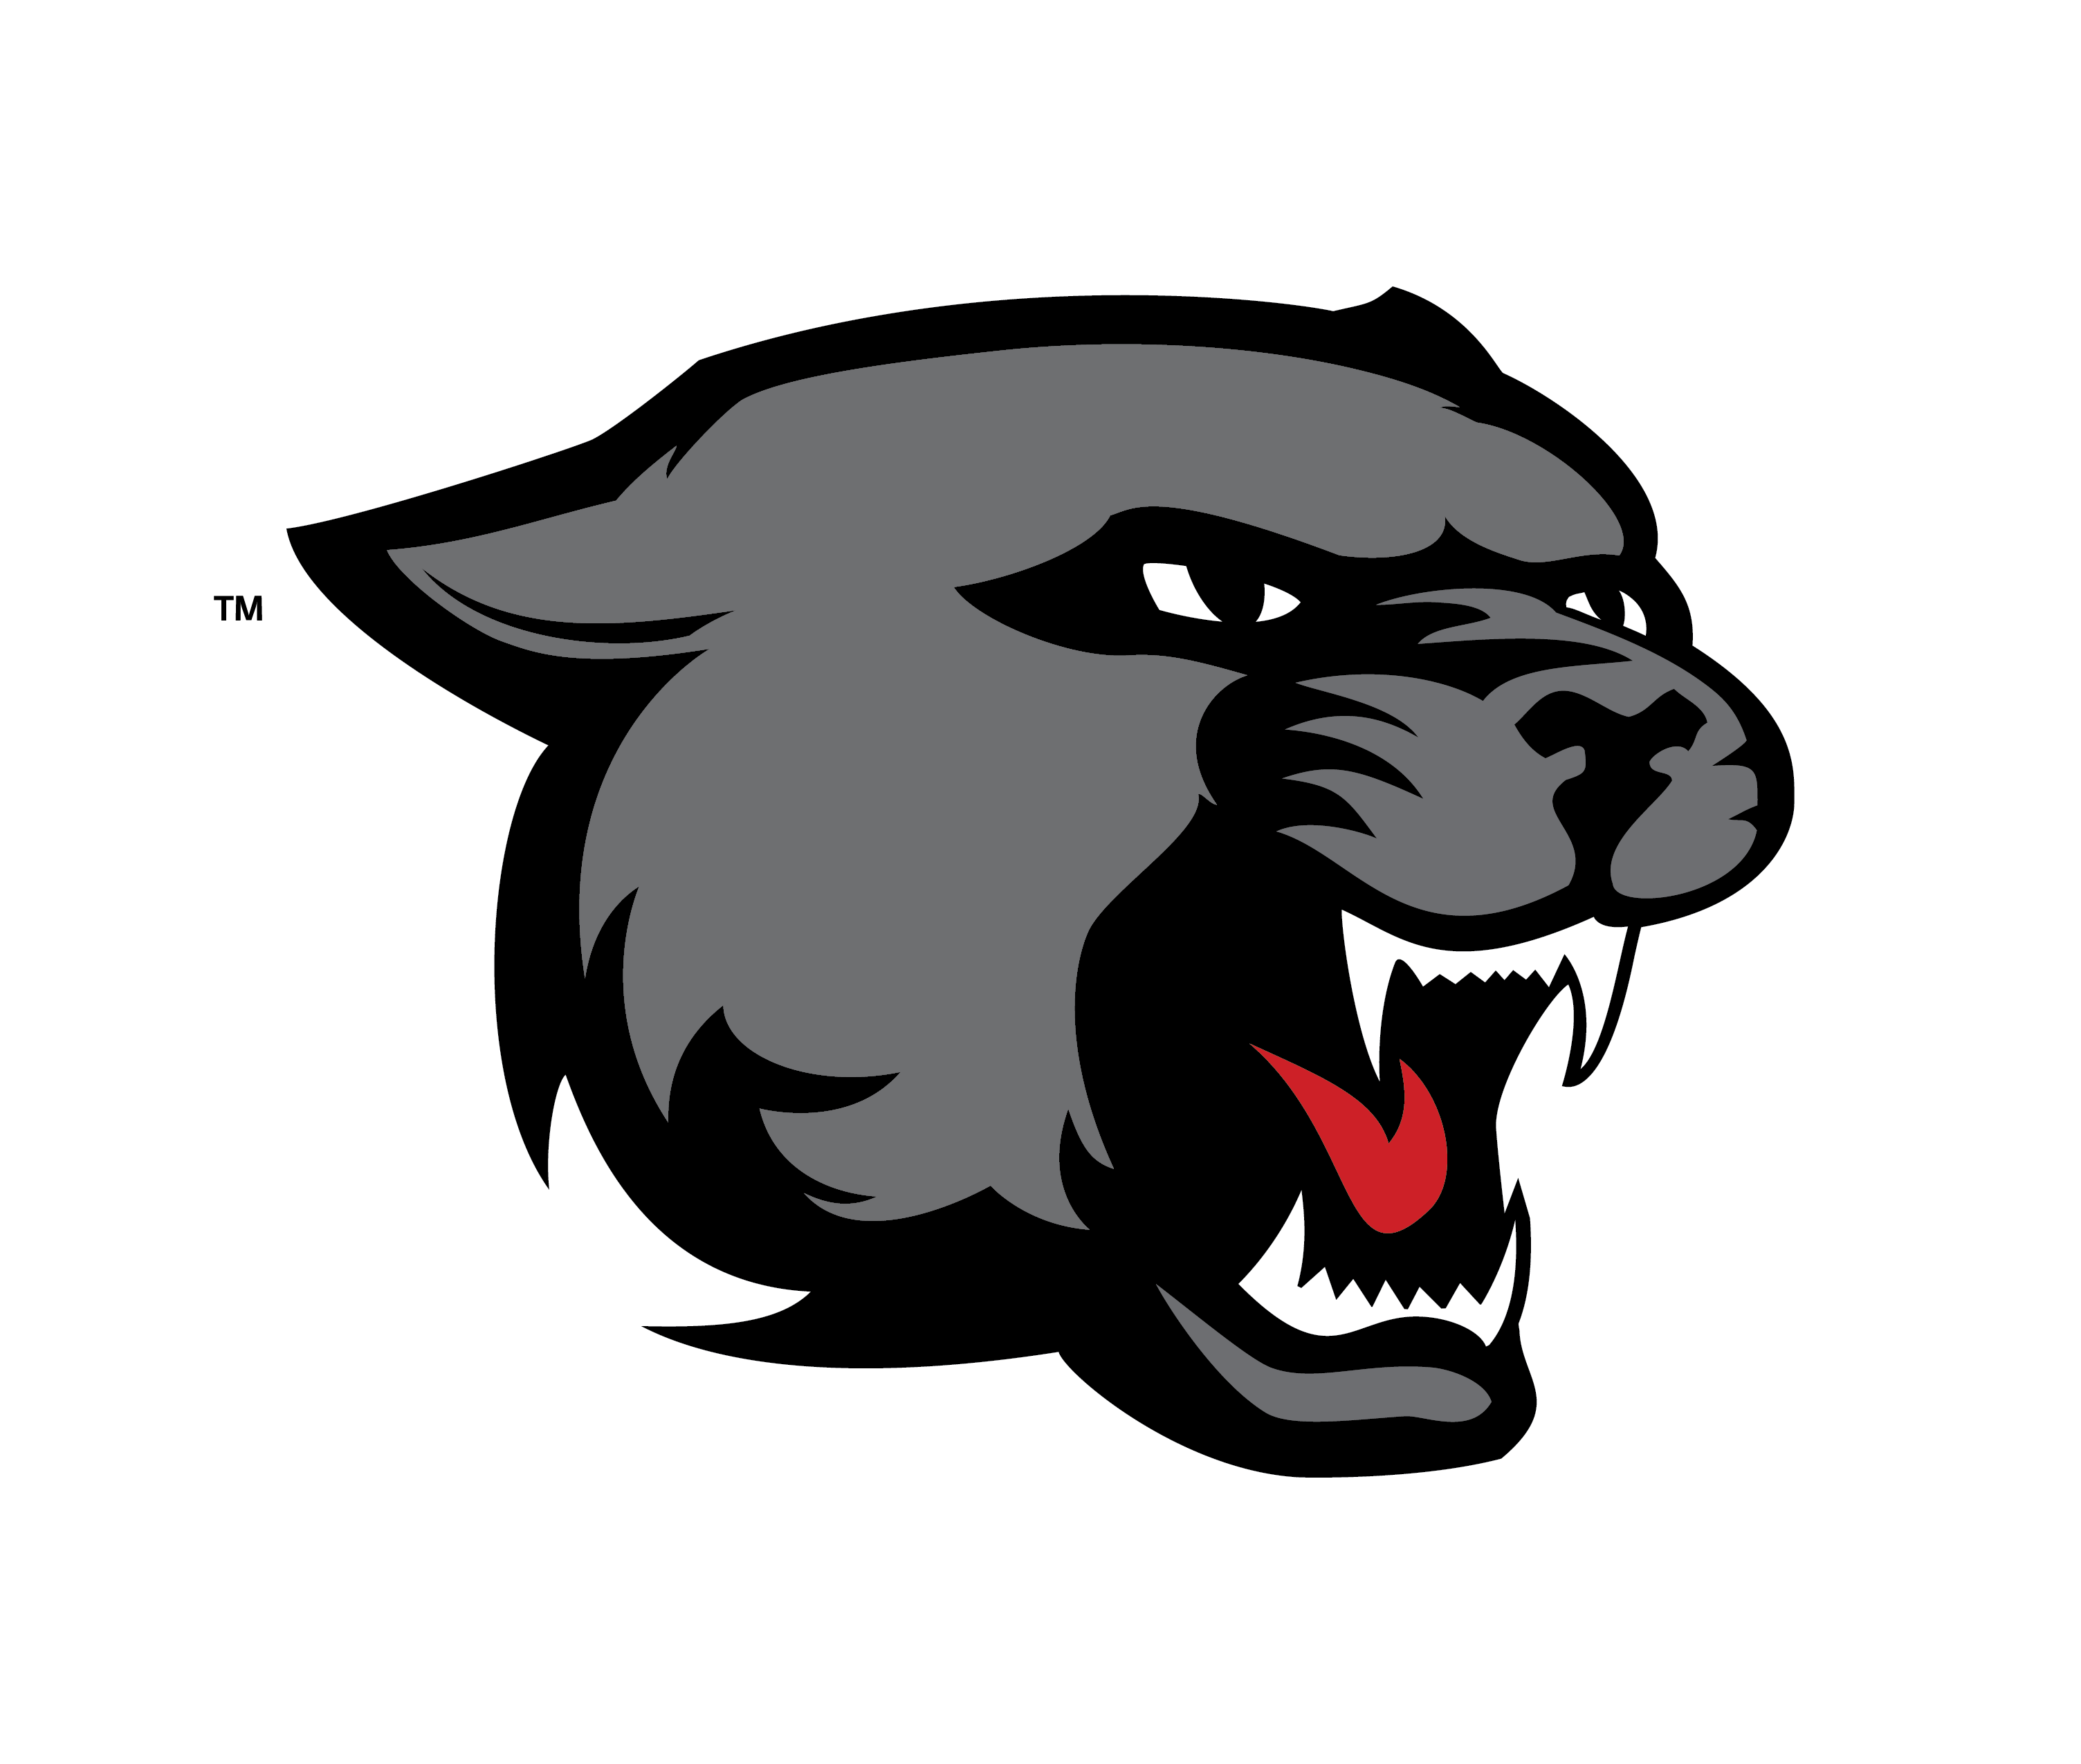 panther clipart panther head